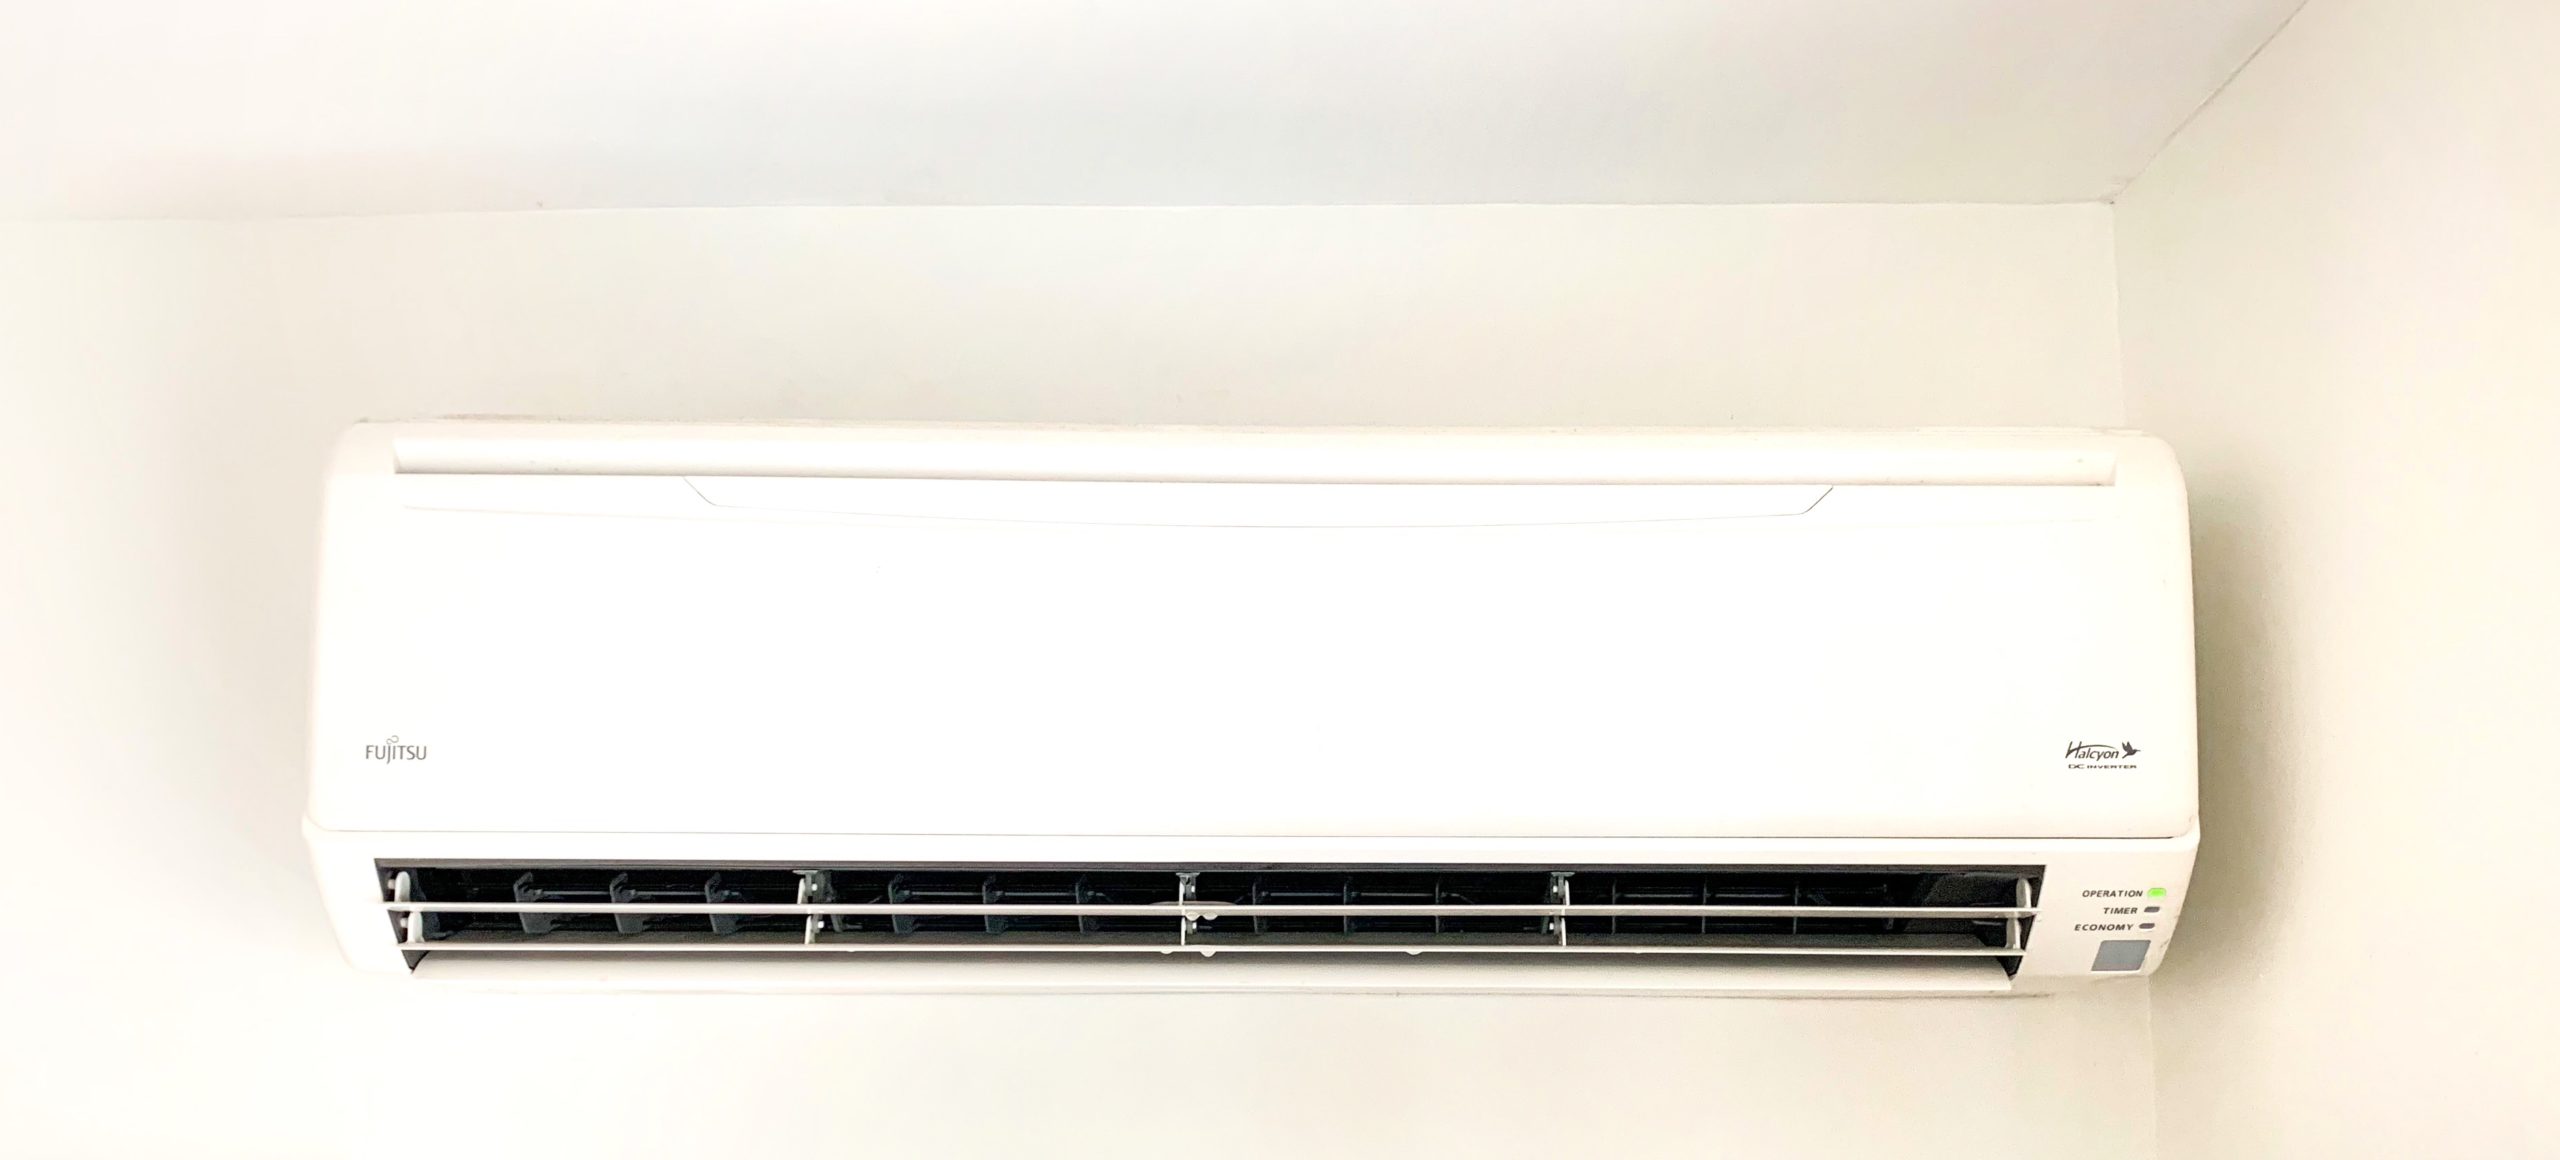 Fujitsu ductless air conditioner review – the things we love and don’t love